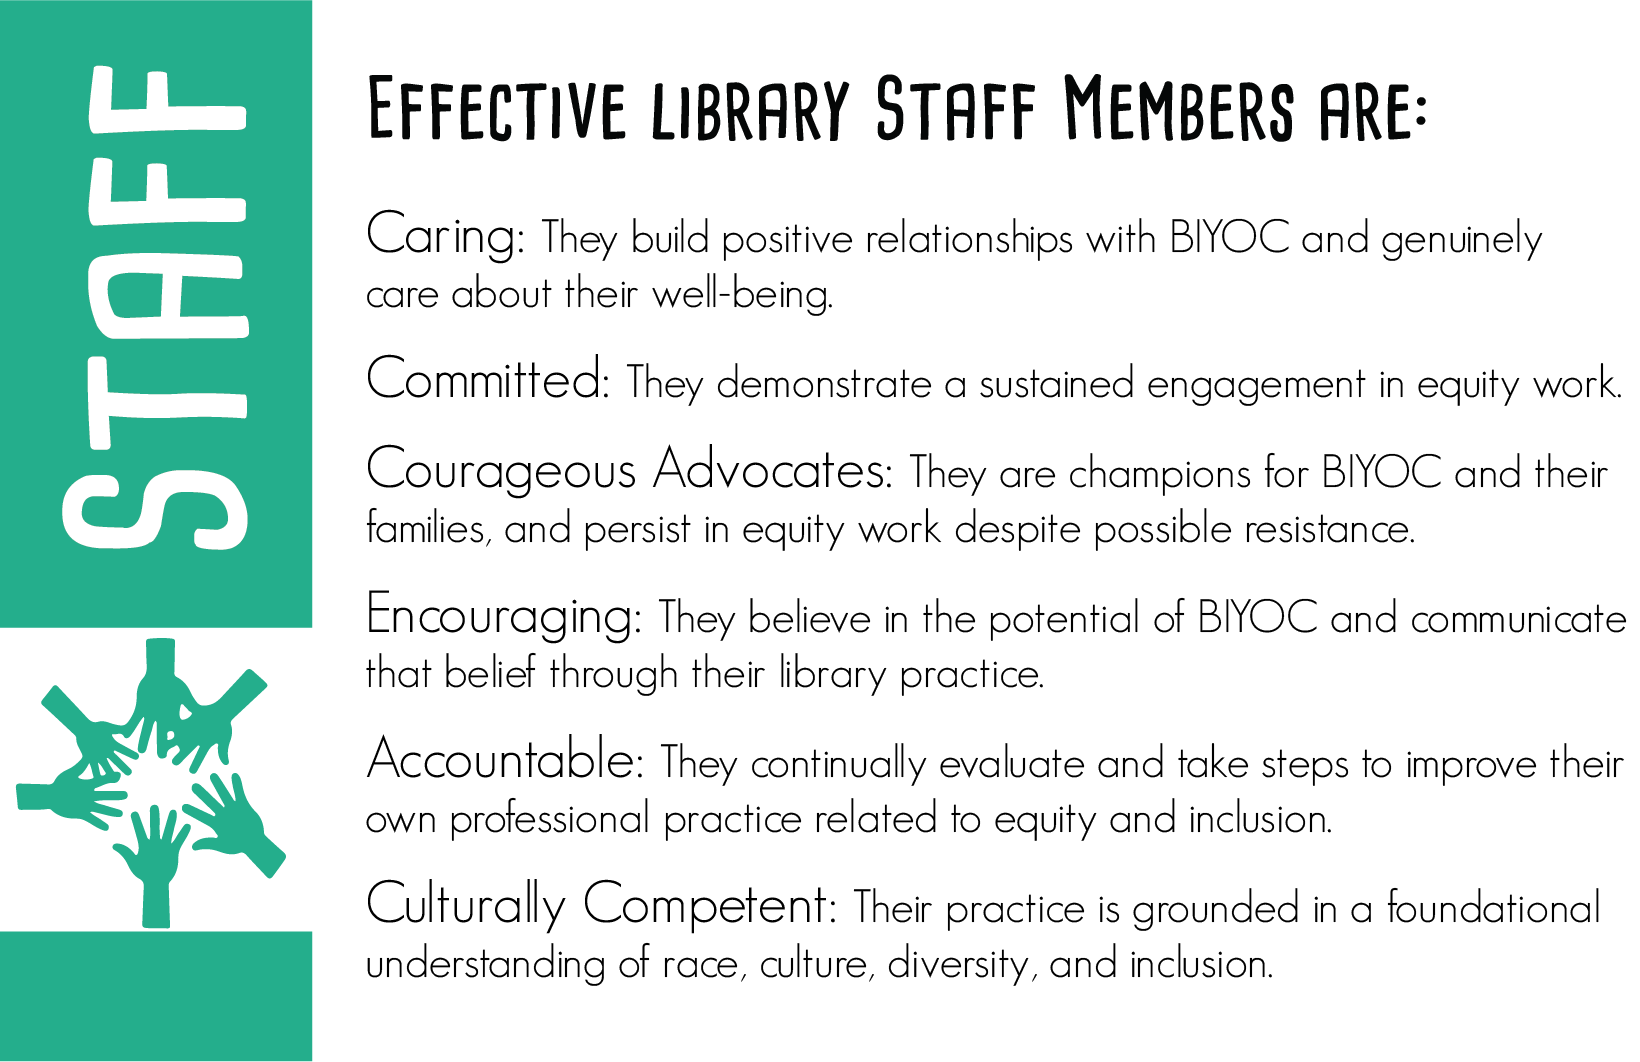 Effective library staff members are:  Caring: They build positive relationships with BIYOC and genuinely care about their well-being.  Committed: They demonstrate a sustained engagement in equity work.  Courageous Advocates: They are champions for BIYOC and their families, and persist in equity work despite possible resistance.  Encouraging: They believe in the potential of BIYOC and communicate that belief through their library practice.  Accountable: They continually evaluate and take steps to improve their own professional practice related to equity and inclusion.  Culturally Competent: Their practice is grounded in a foundational understanding of race, culture, diversity, and inclusion.